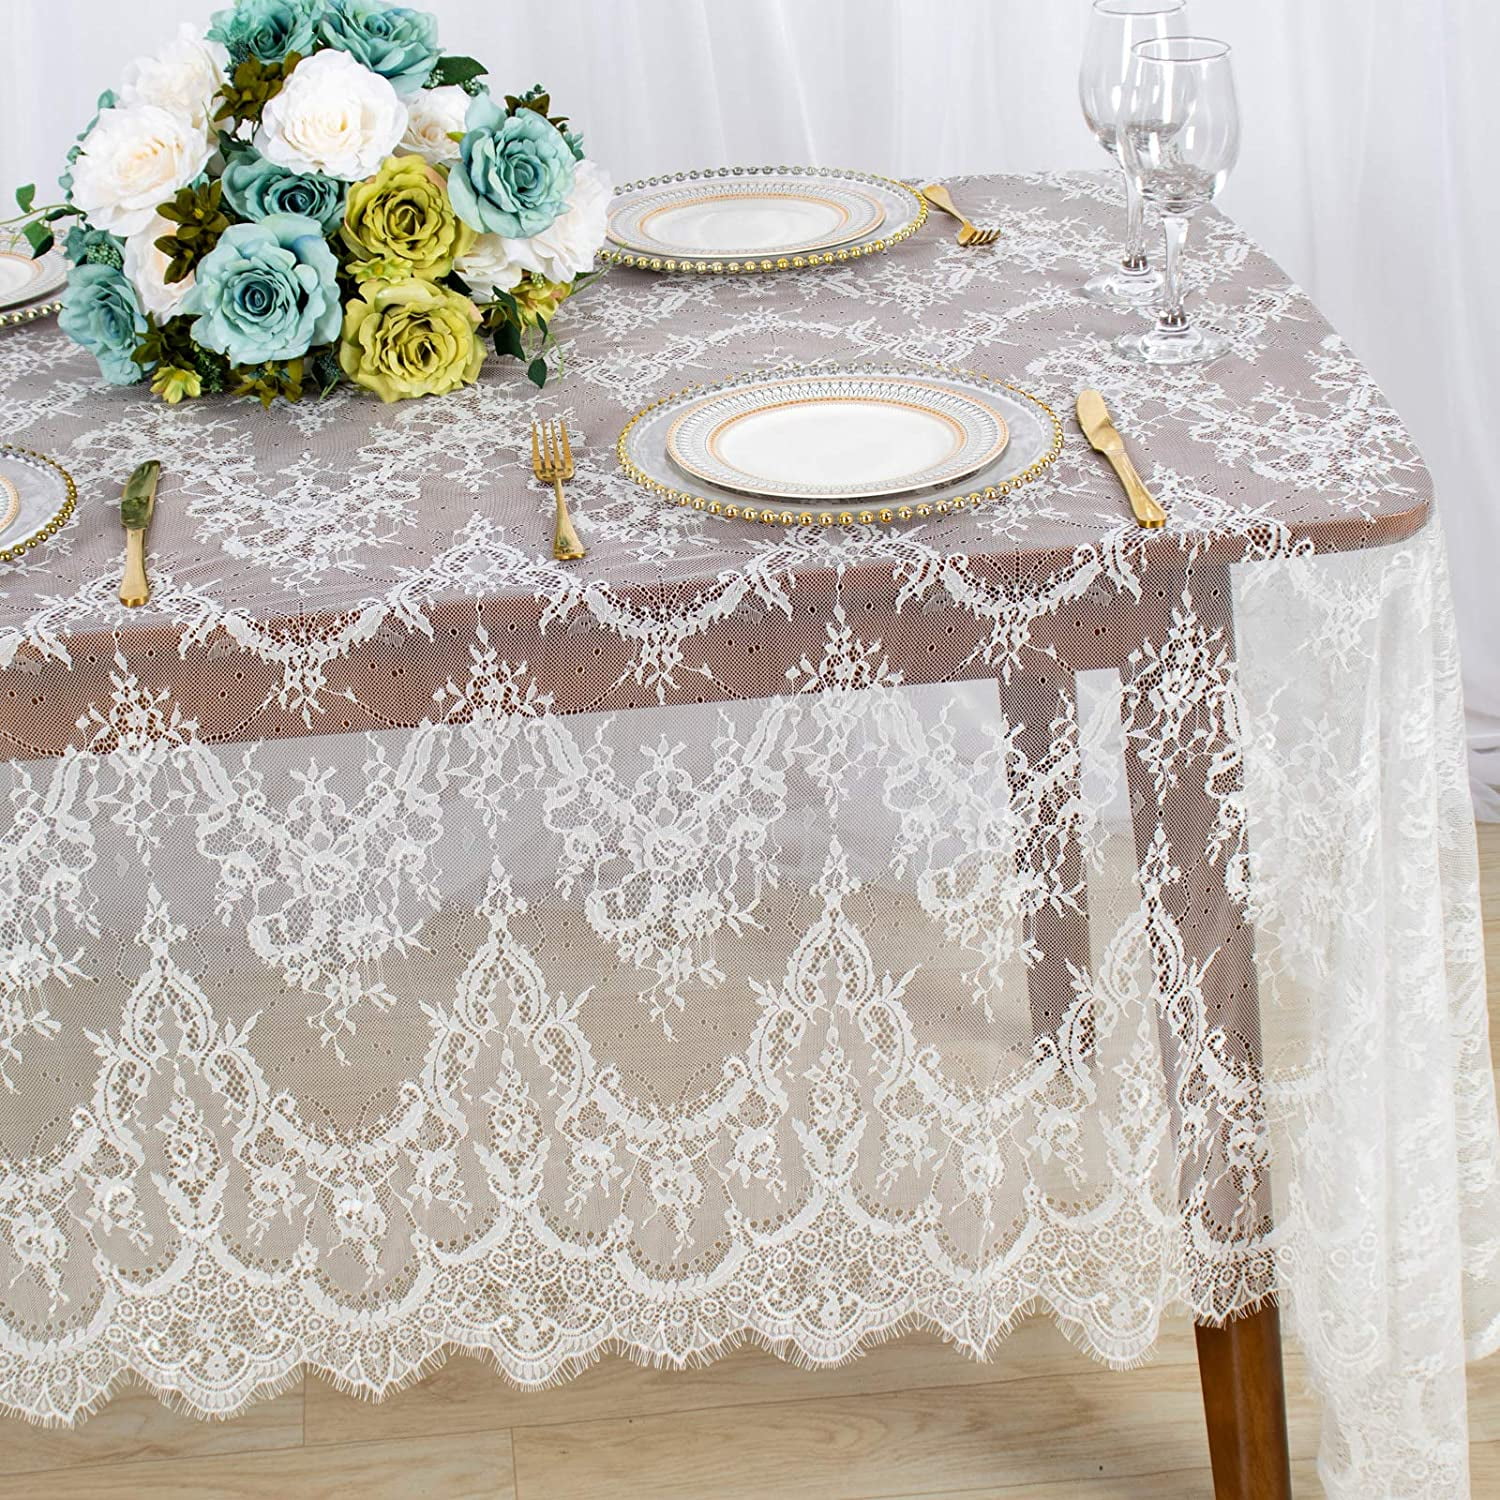 White Embroidered Lace Table Cloth Floral Tablecloth Wedding/Party Satin Fabric 